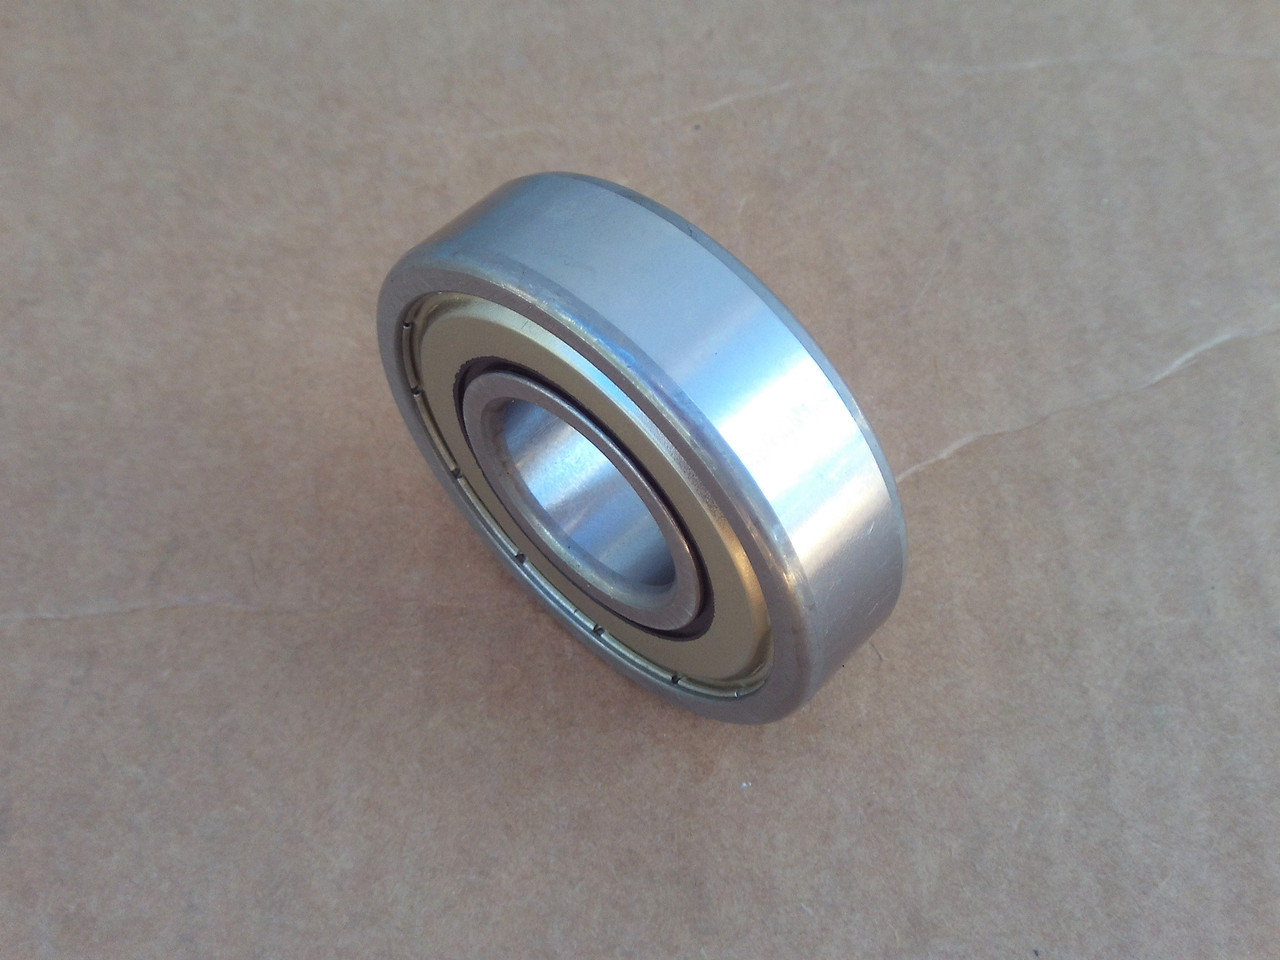 Spindle Bearing for Lesco 050397, 6305RST, 6305-RST, ID: 0.984"= 1" OD: 2.44"= 2-3/8" Height: 0.669= 5/8"